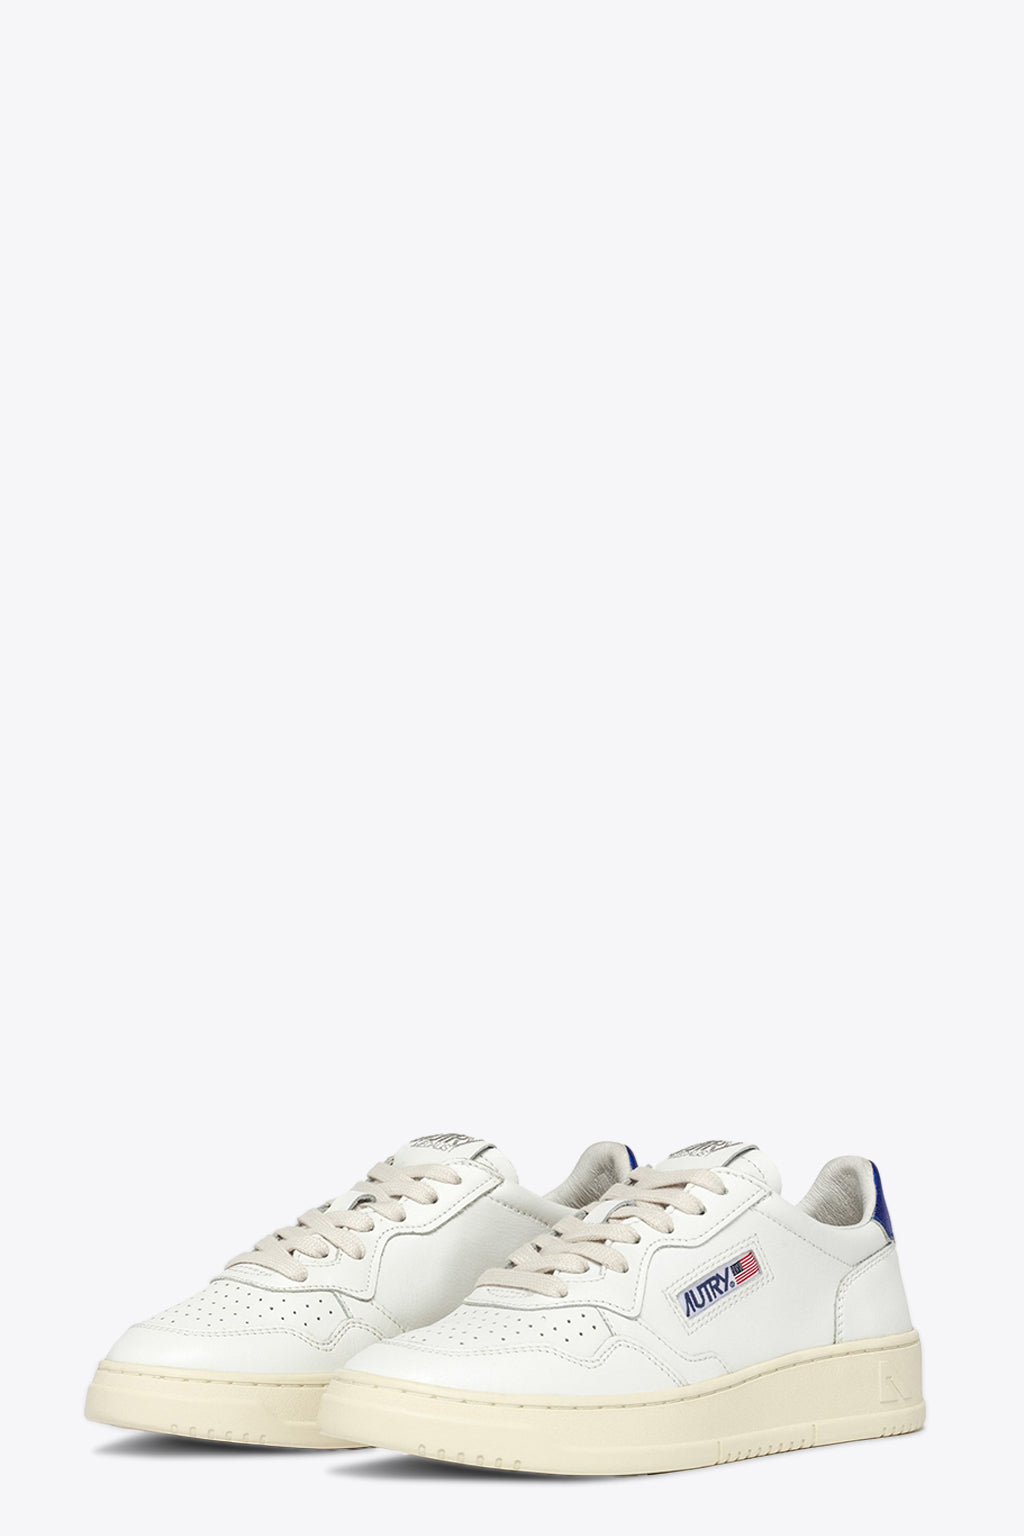 alt-image__White-leather-low-sneaker-with-blue-tab---Medalist